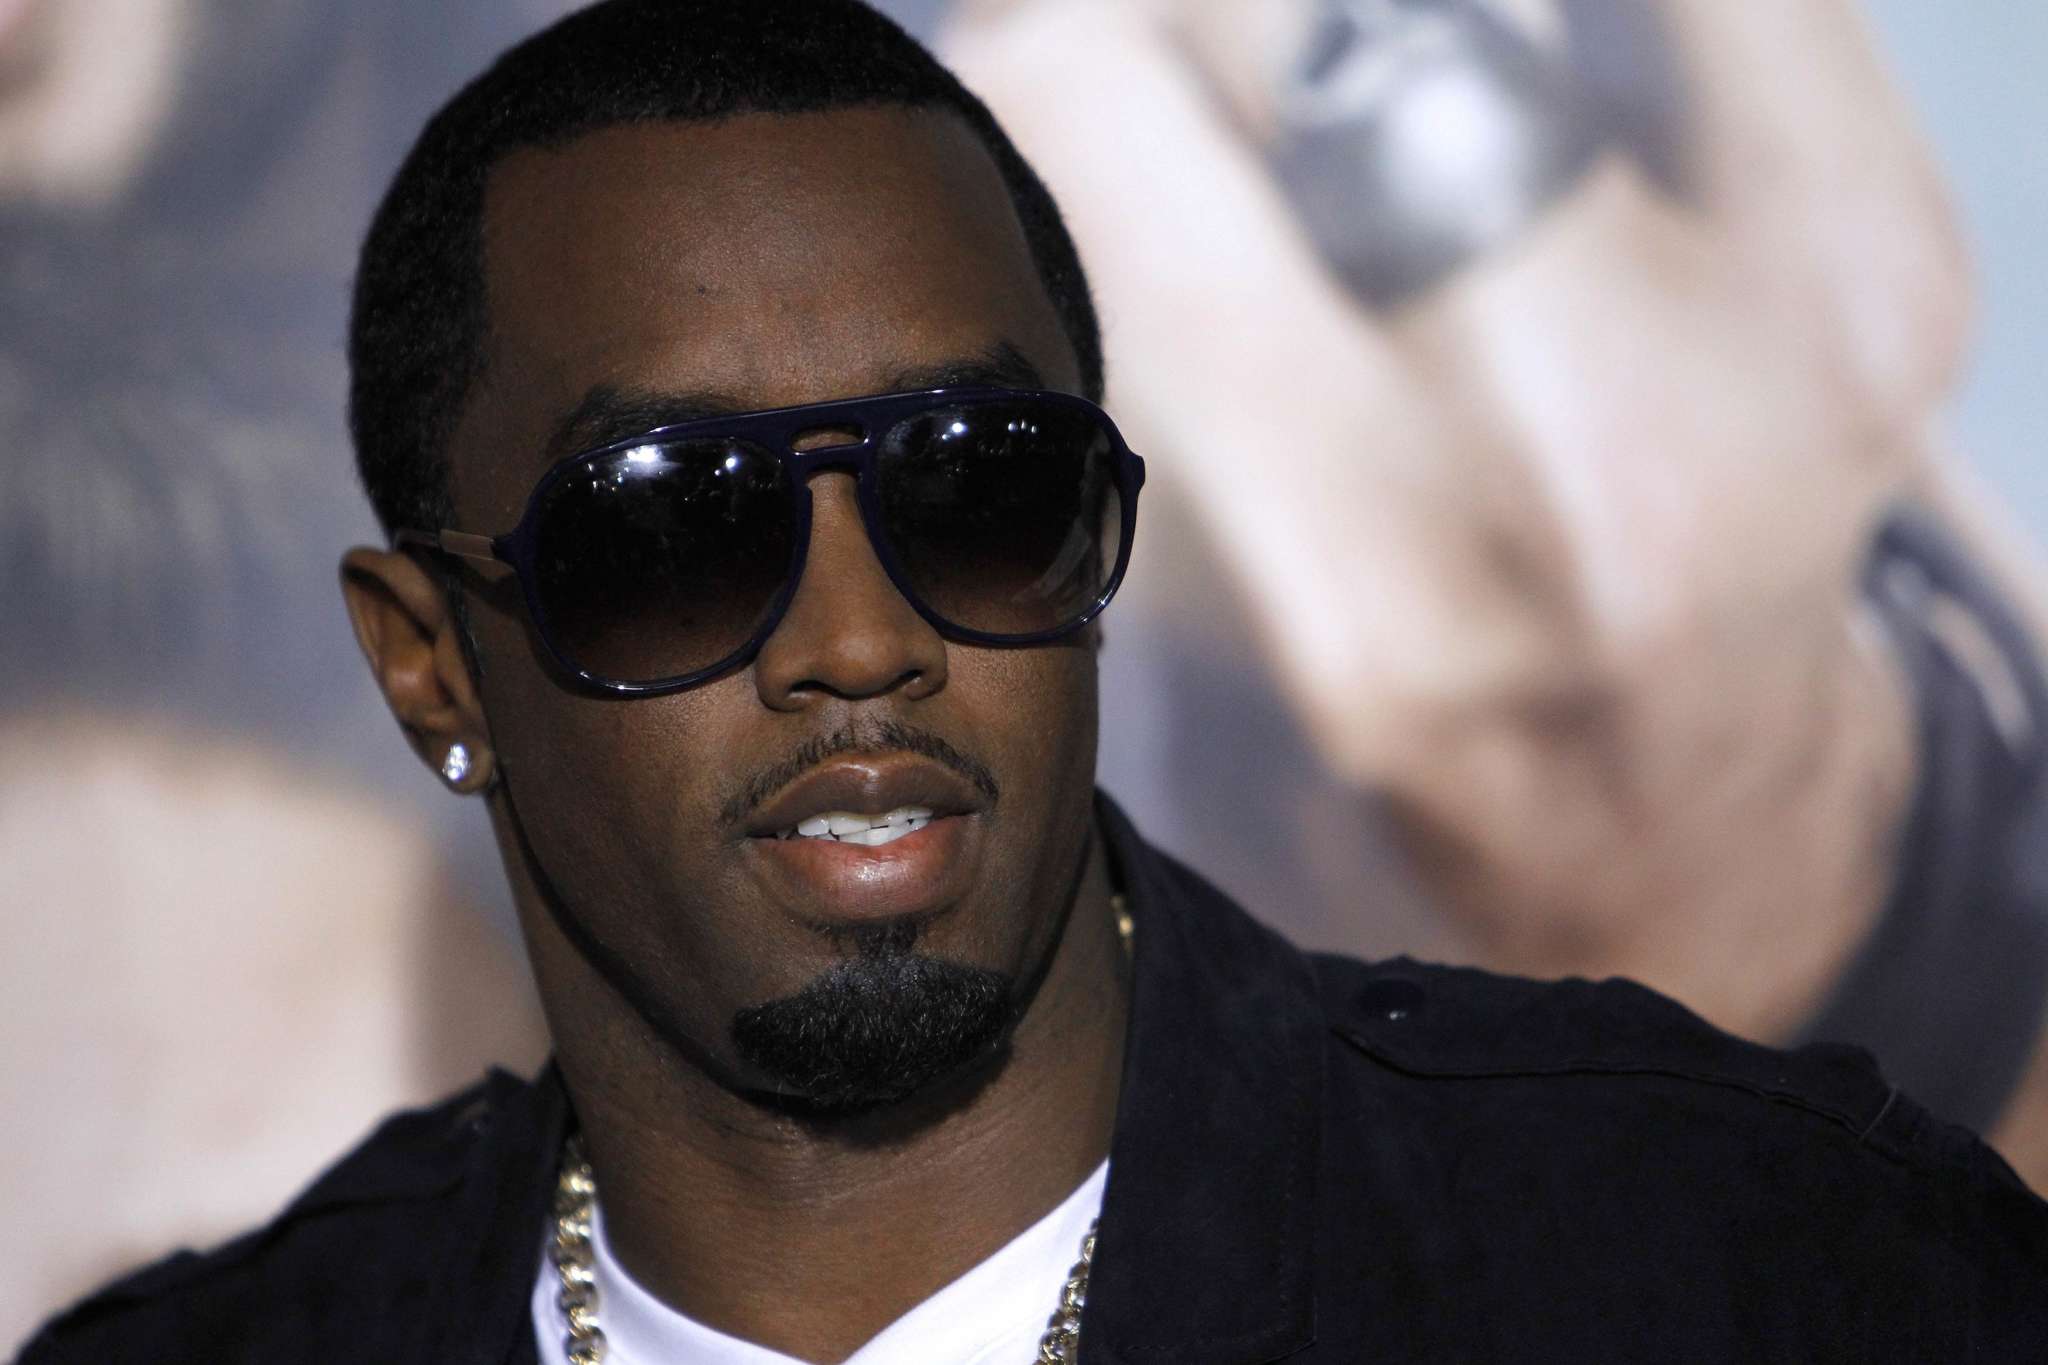 Dive into the drama-fueled saga of the recent P Diddy mansion raid. Understand the suspense, scandal, and speculated secrets hidden in this hip-hop paradise.